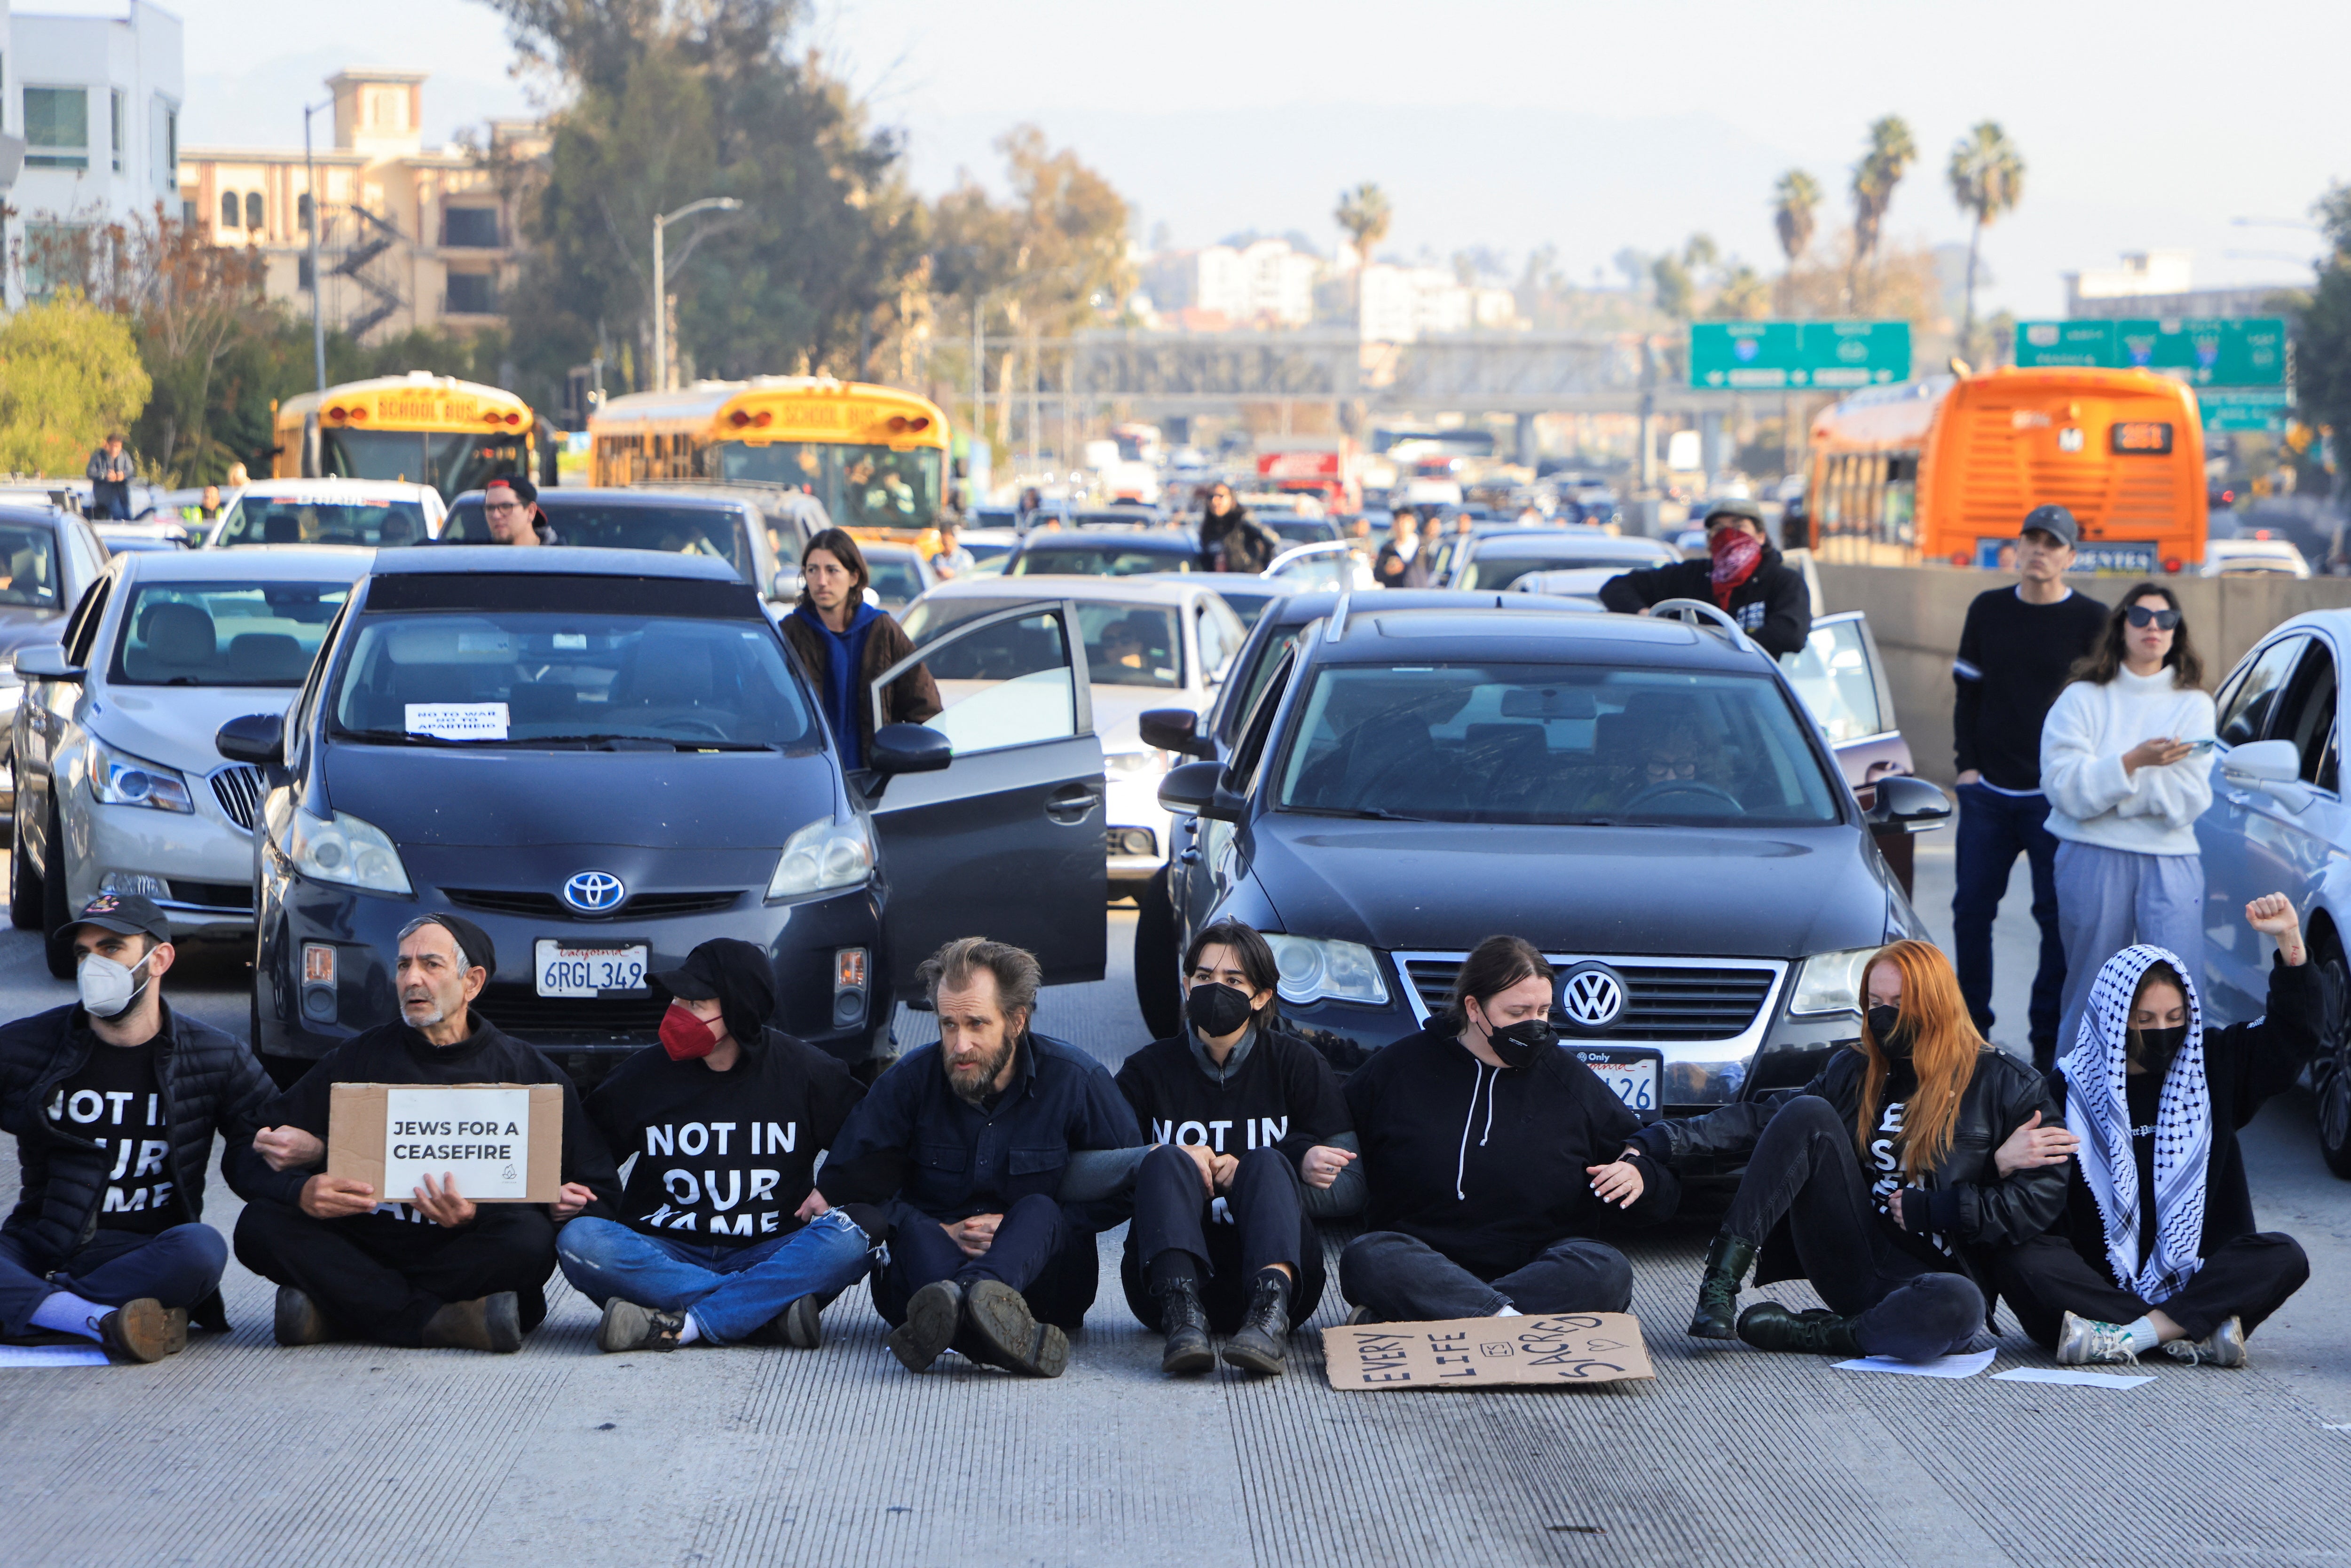 Dozens of Jewish protesters block the 110 Freeway in LA as they call for Gaza ceasefire